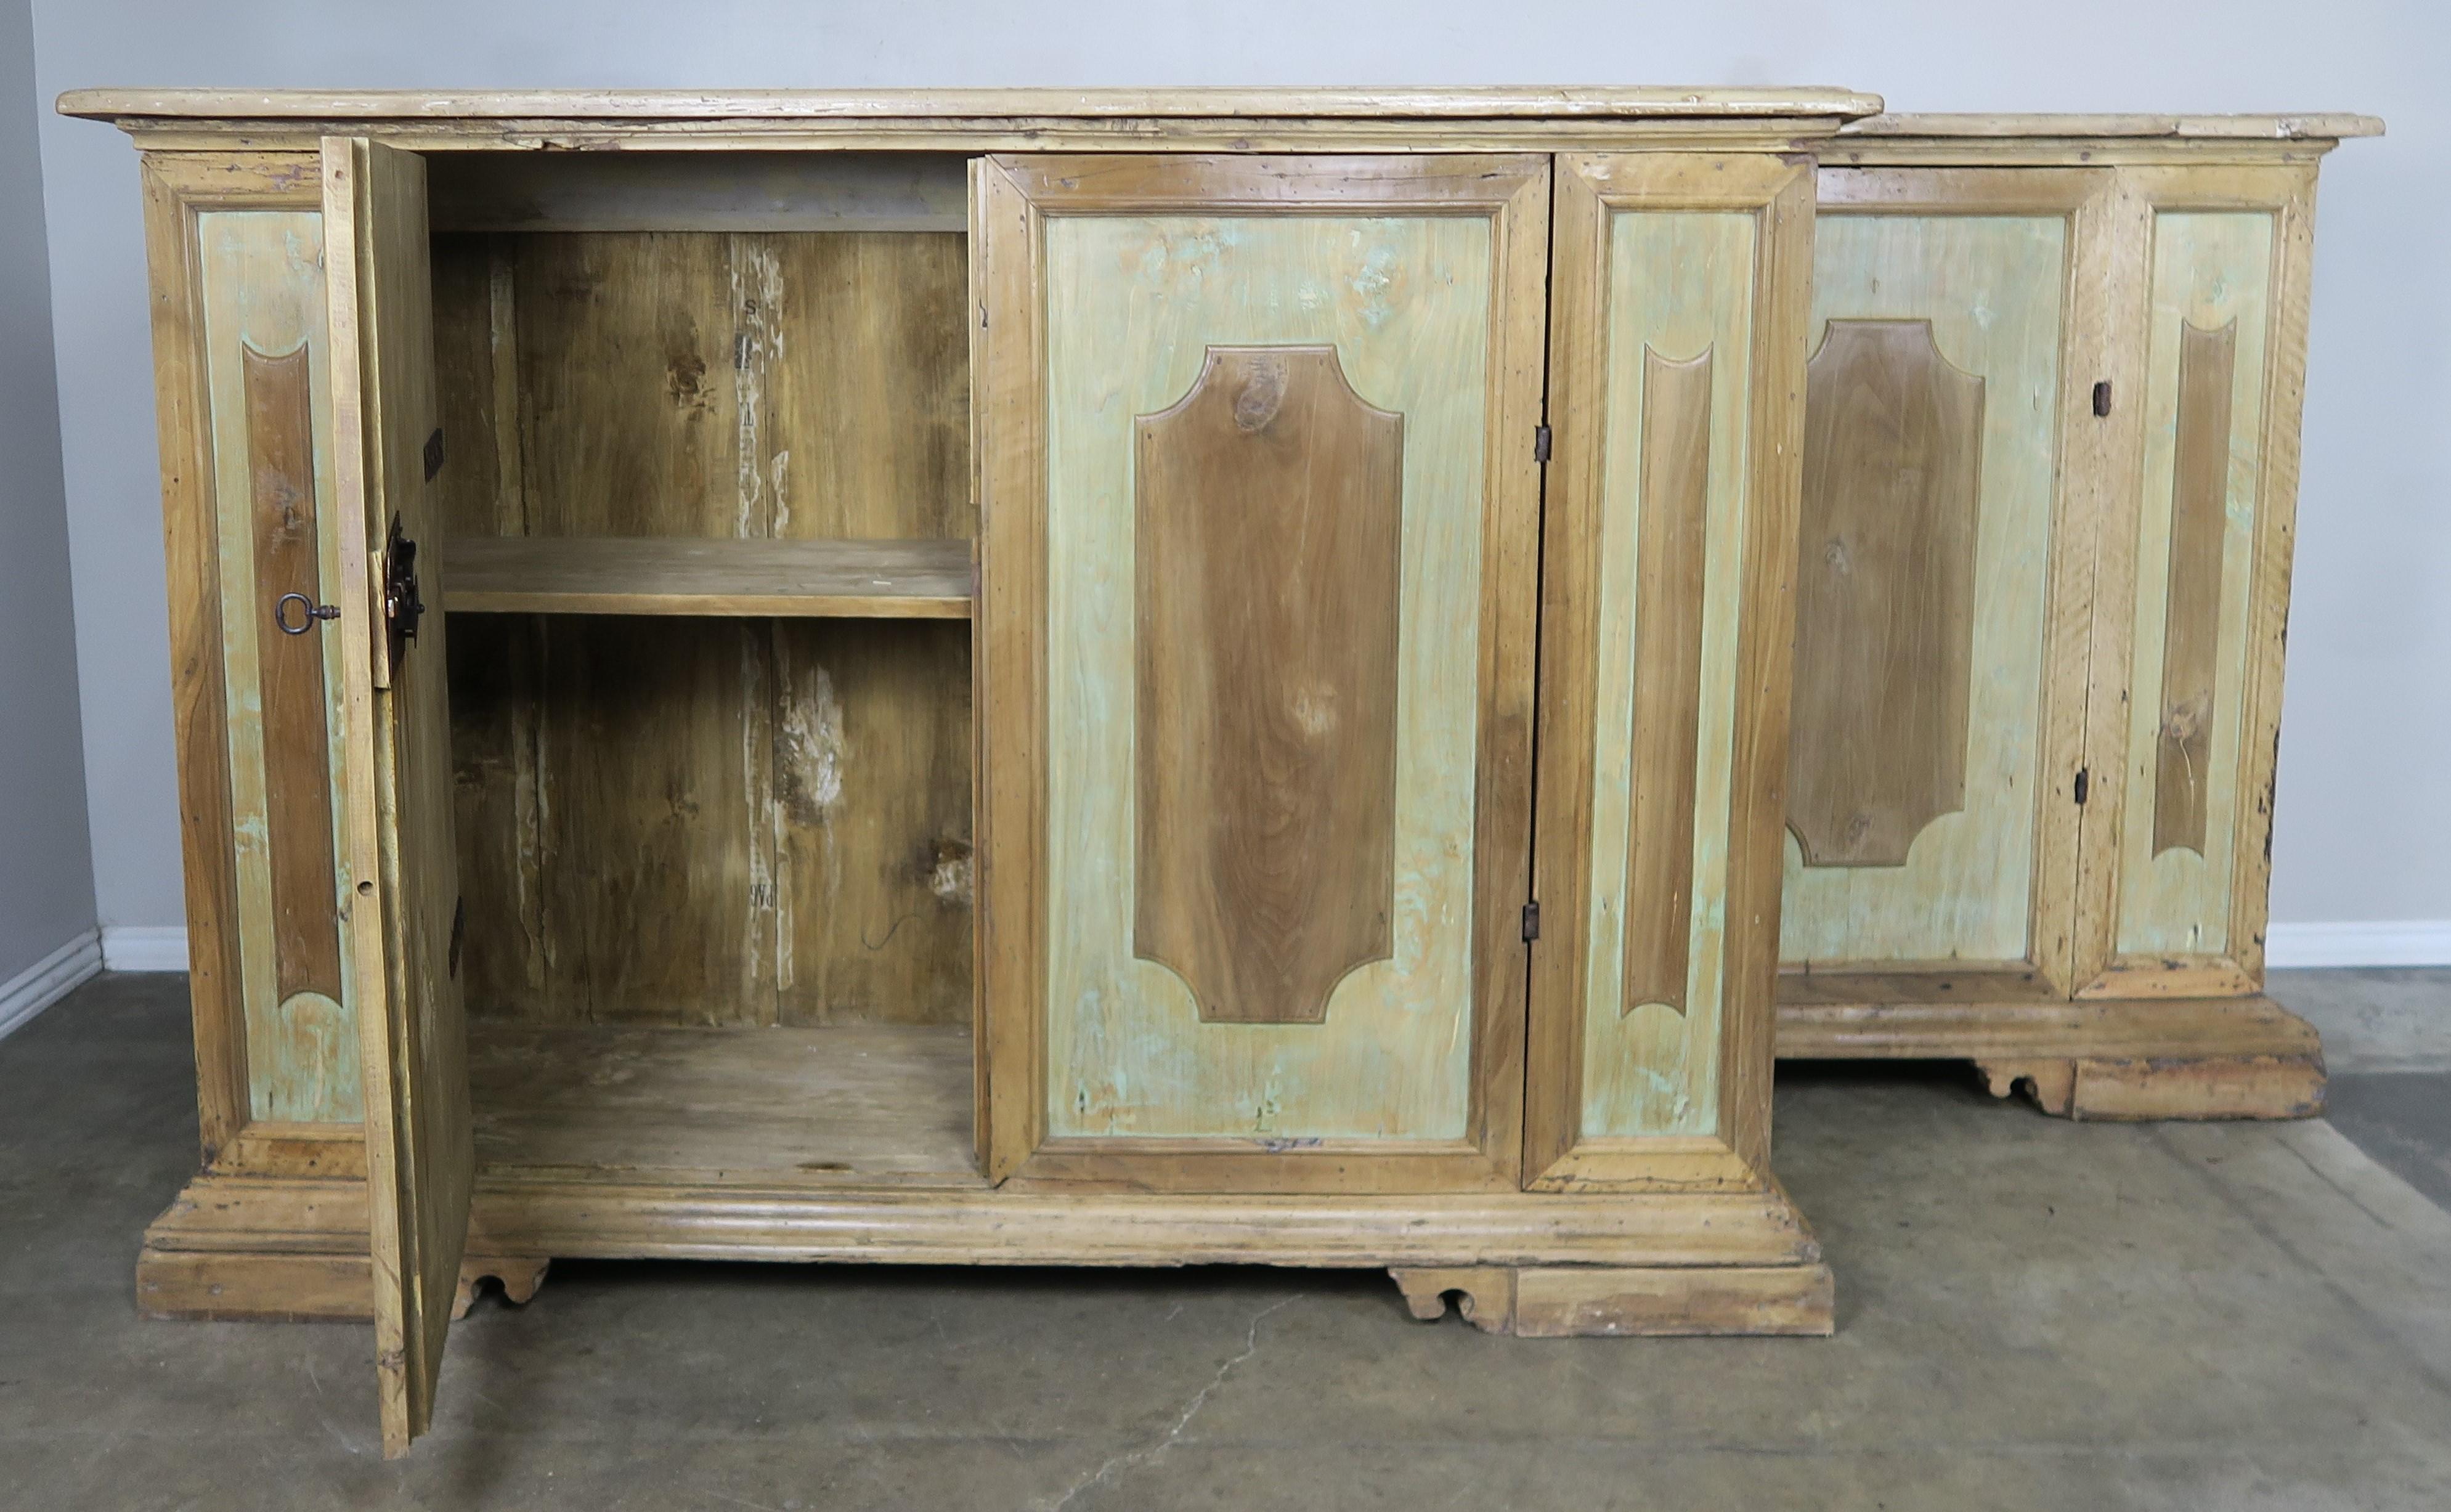 Pair of early 19th century Italian walnut painted sideboards with two doors and single shelf on each cabinet. The paint is beautifully worn to a soft celadon coloration. Original wrought iron hardware and locks.